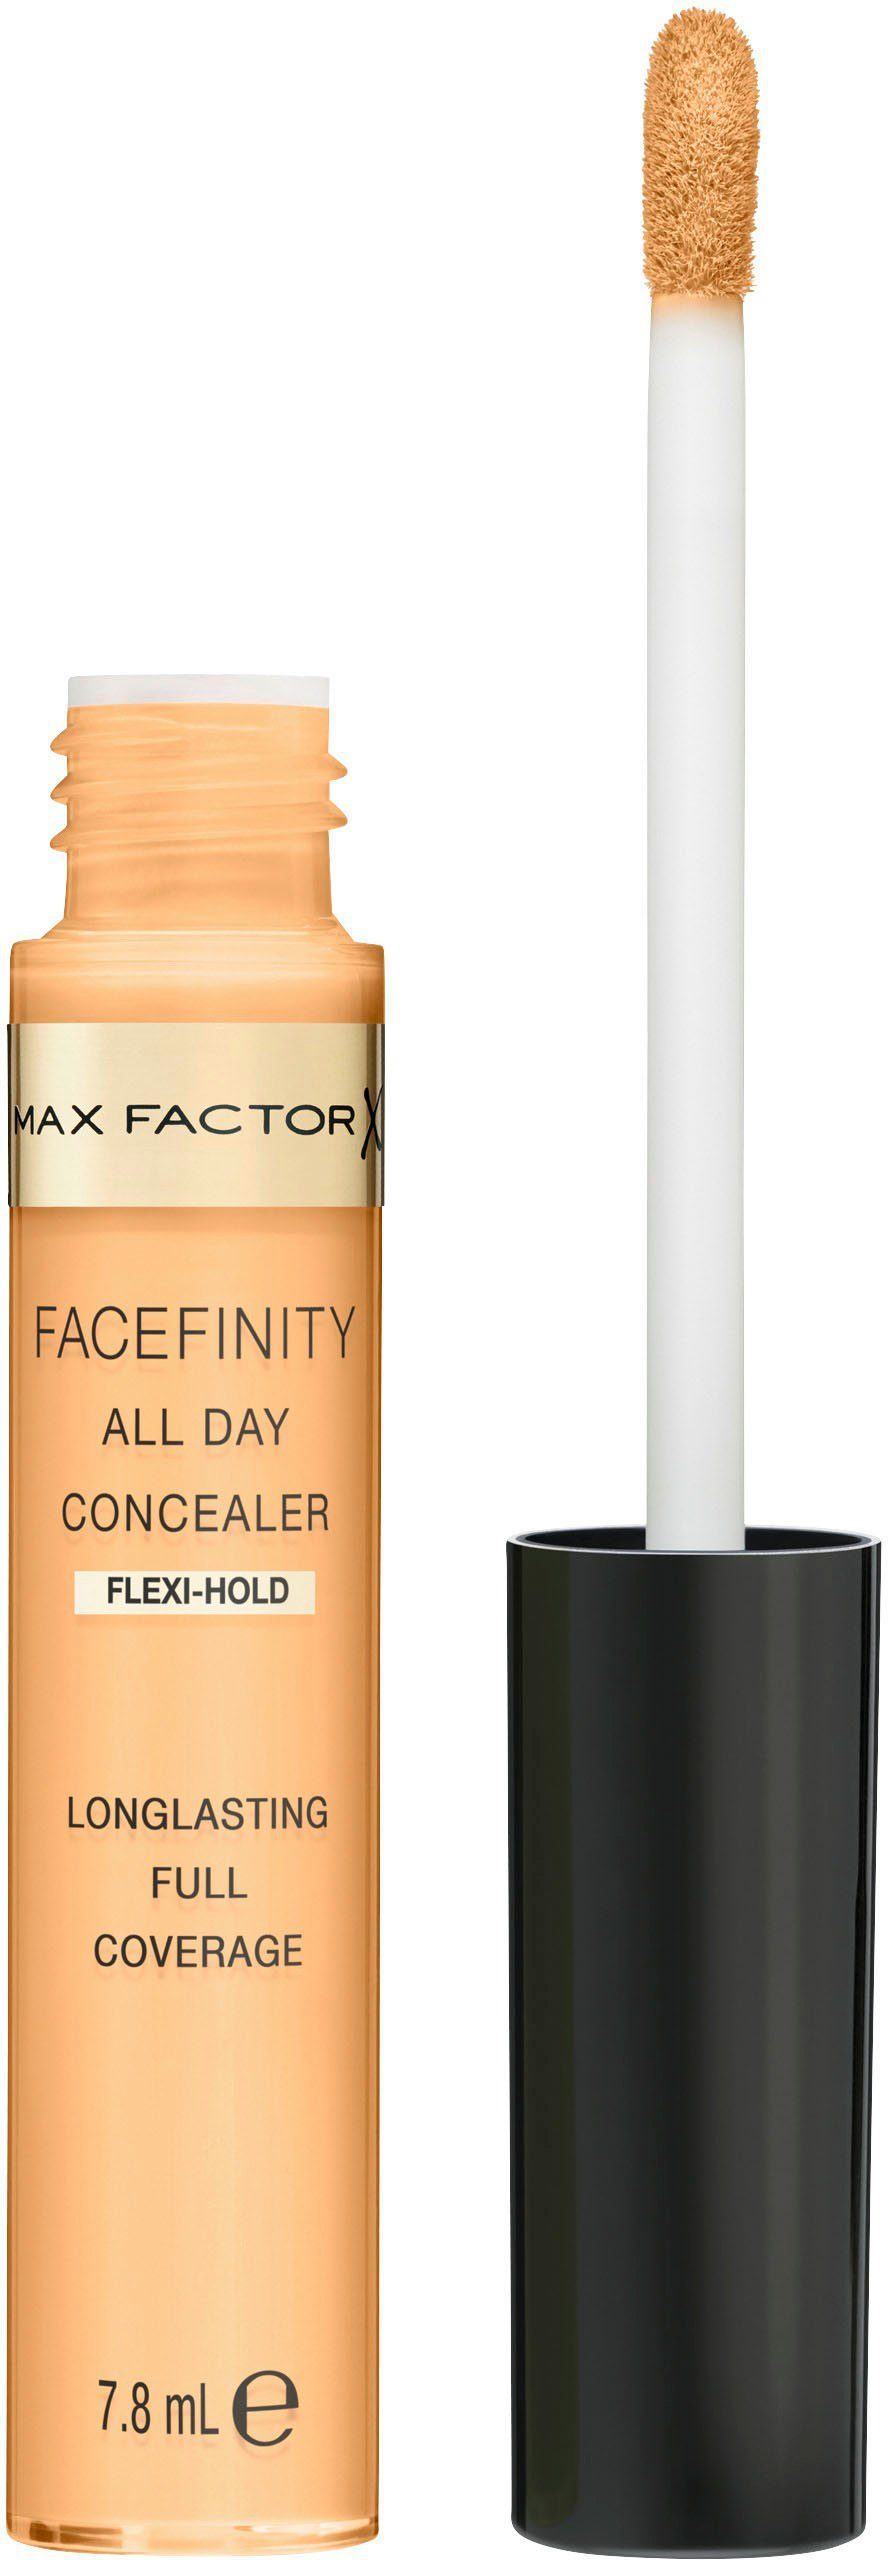 FACEFINITY 40 Day All Concealer FACTOR Flawless MAX